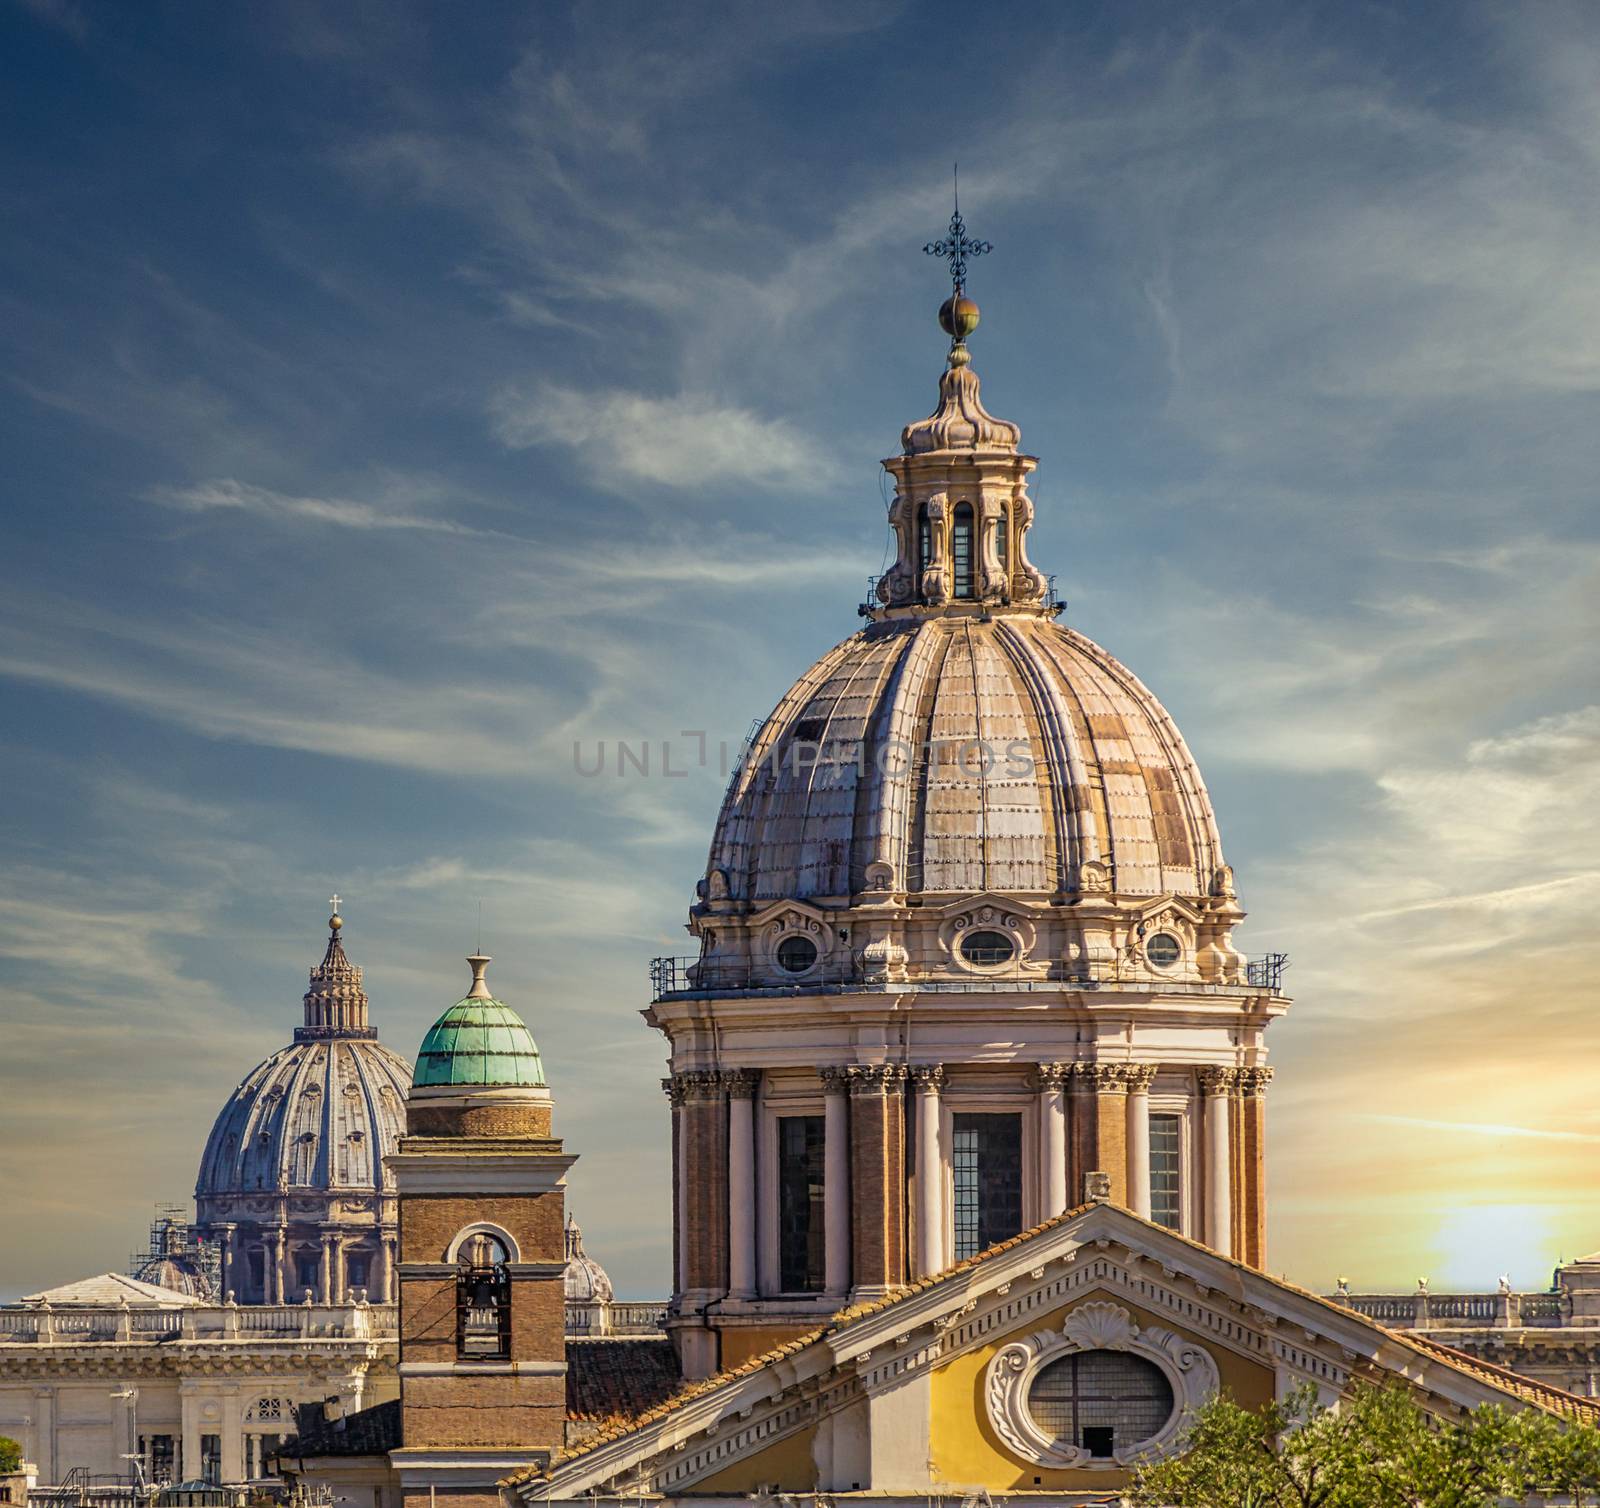 Three Church Domes in Rome under Blue Sky